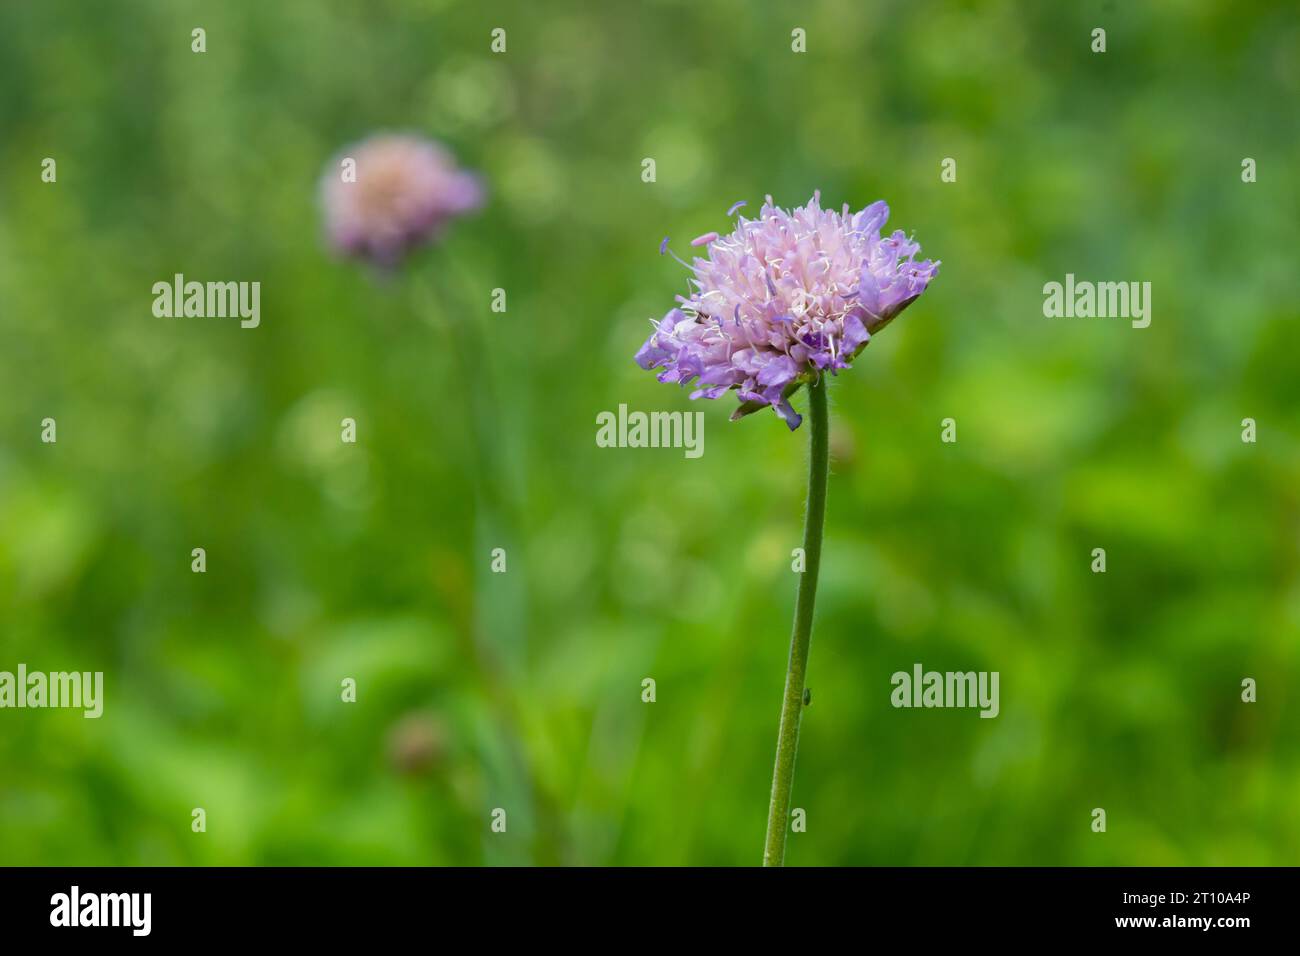 Beautiful single flower of the field scabious Knautia arvensis, close-up view on the green blurred background. Stock Photo